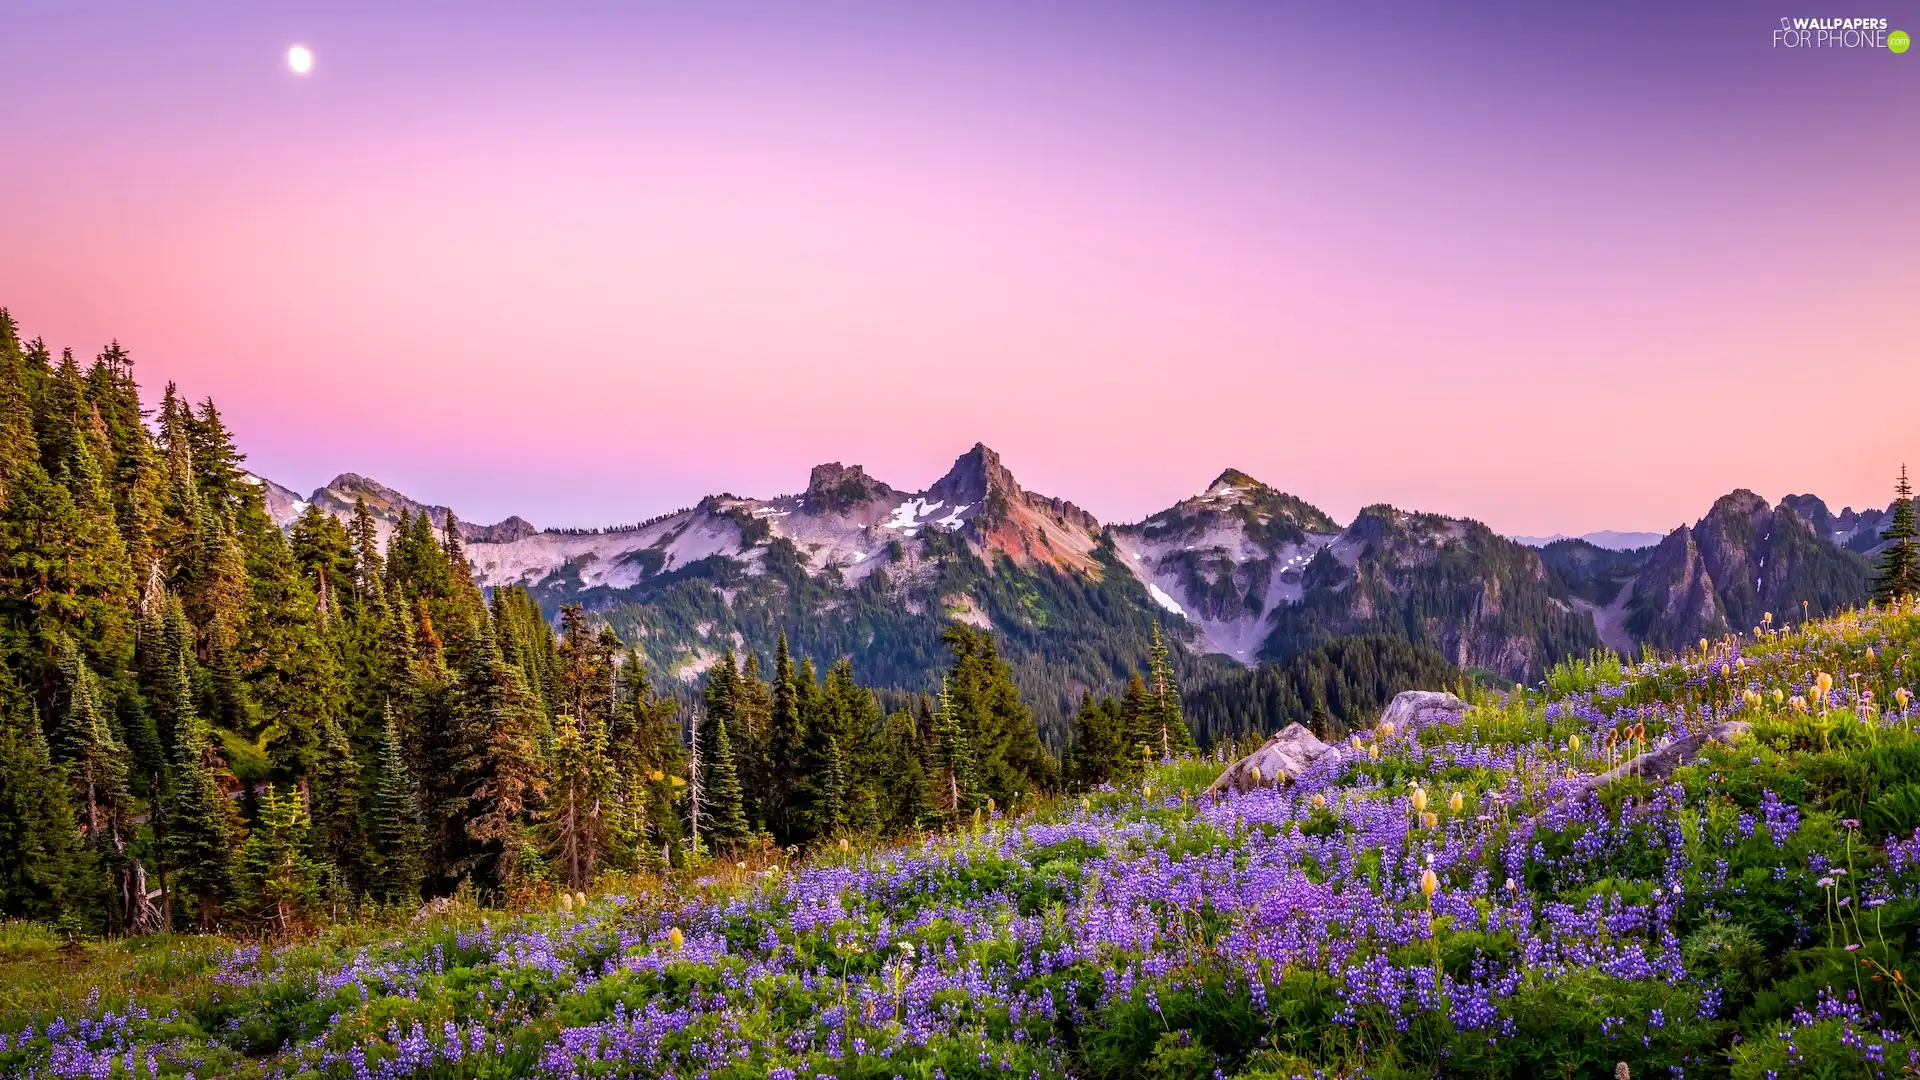 Flowers, Mountains, trees, Washington State, viewes, Mount Rainier National Park, moon, The United States, lupine, Meadow